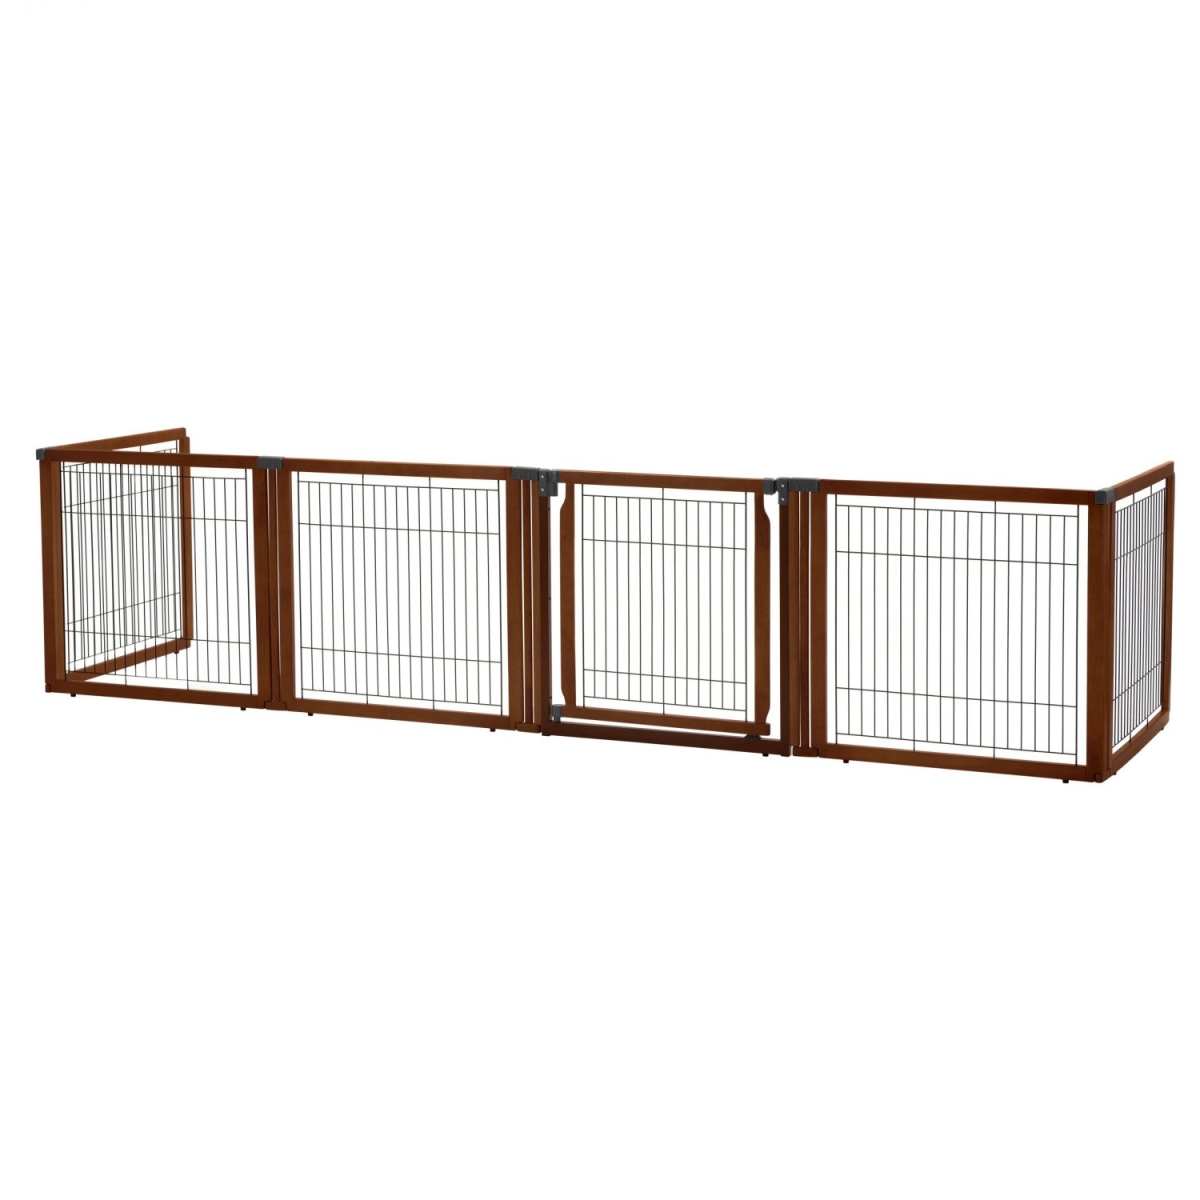 Picture of Richell 94960 Convertible Elite 6 Panel Pet Gate, Cherry Brown